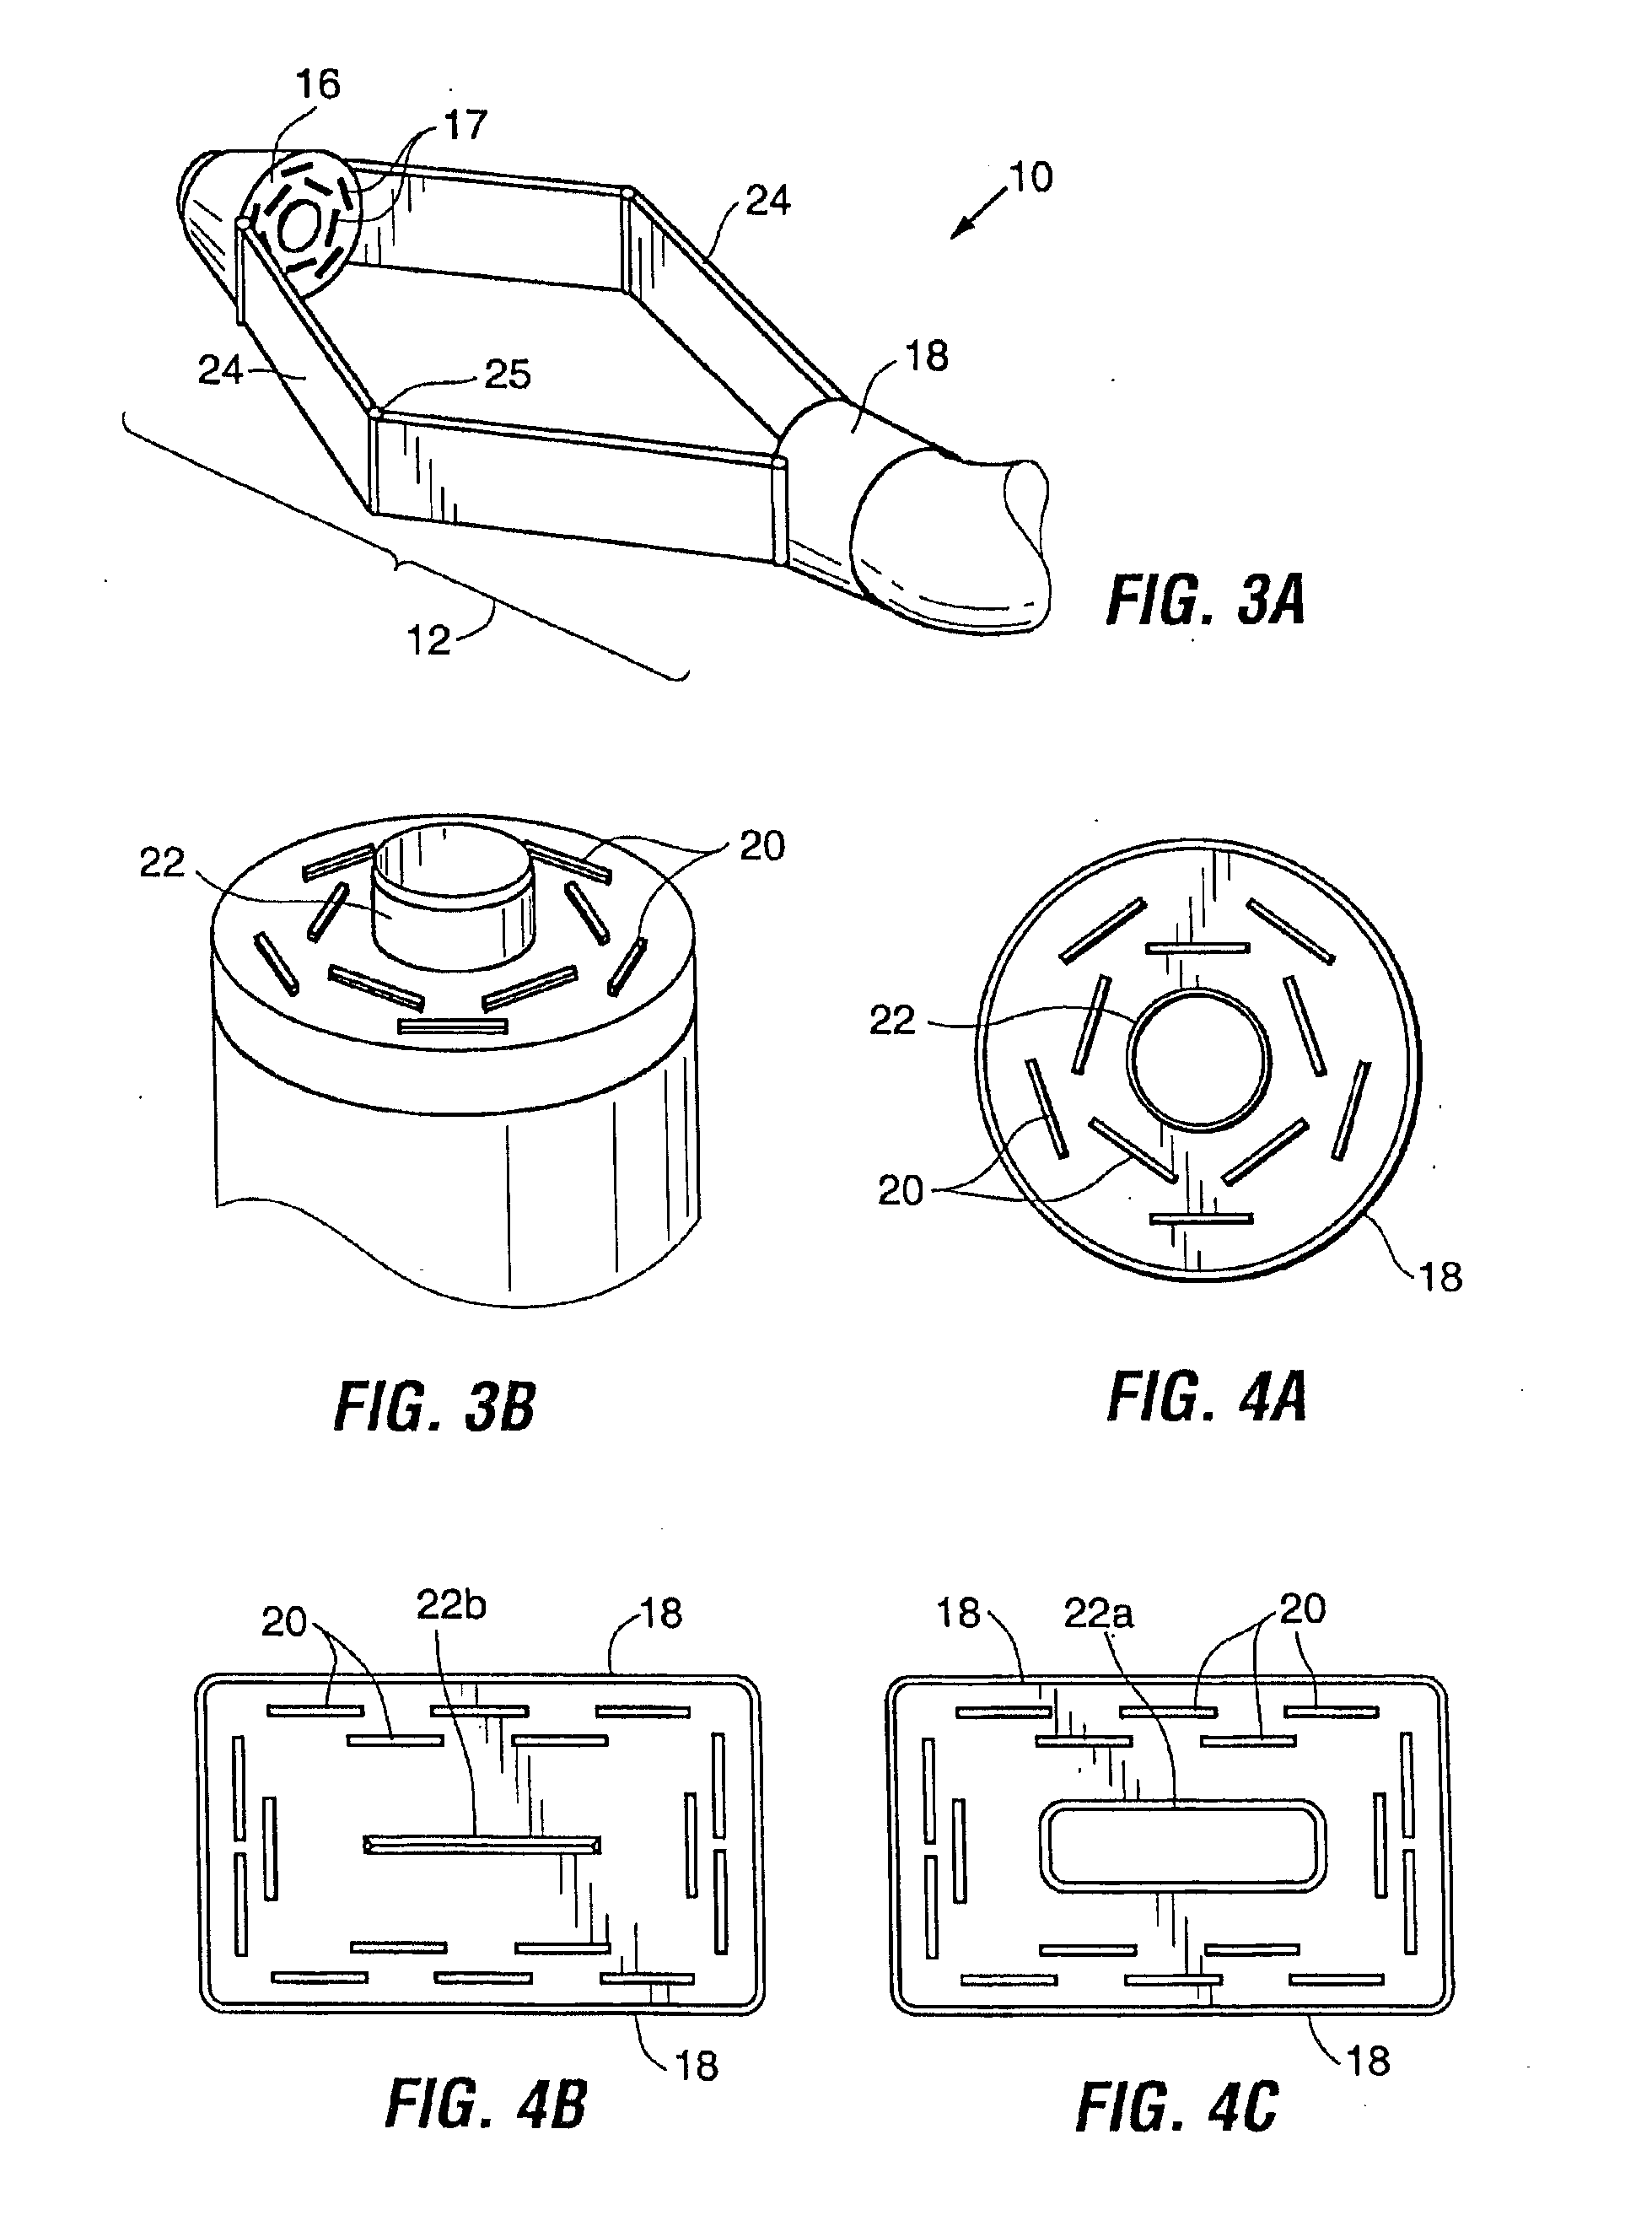 Devices and methods for stomach partitioning